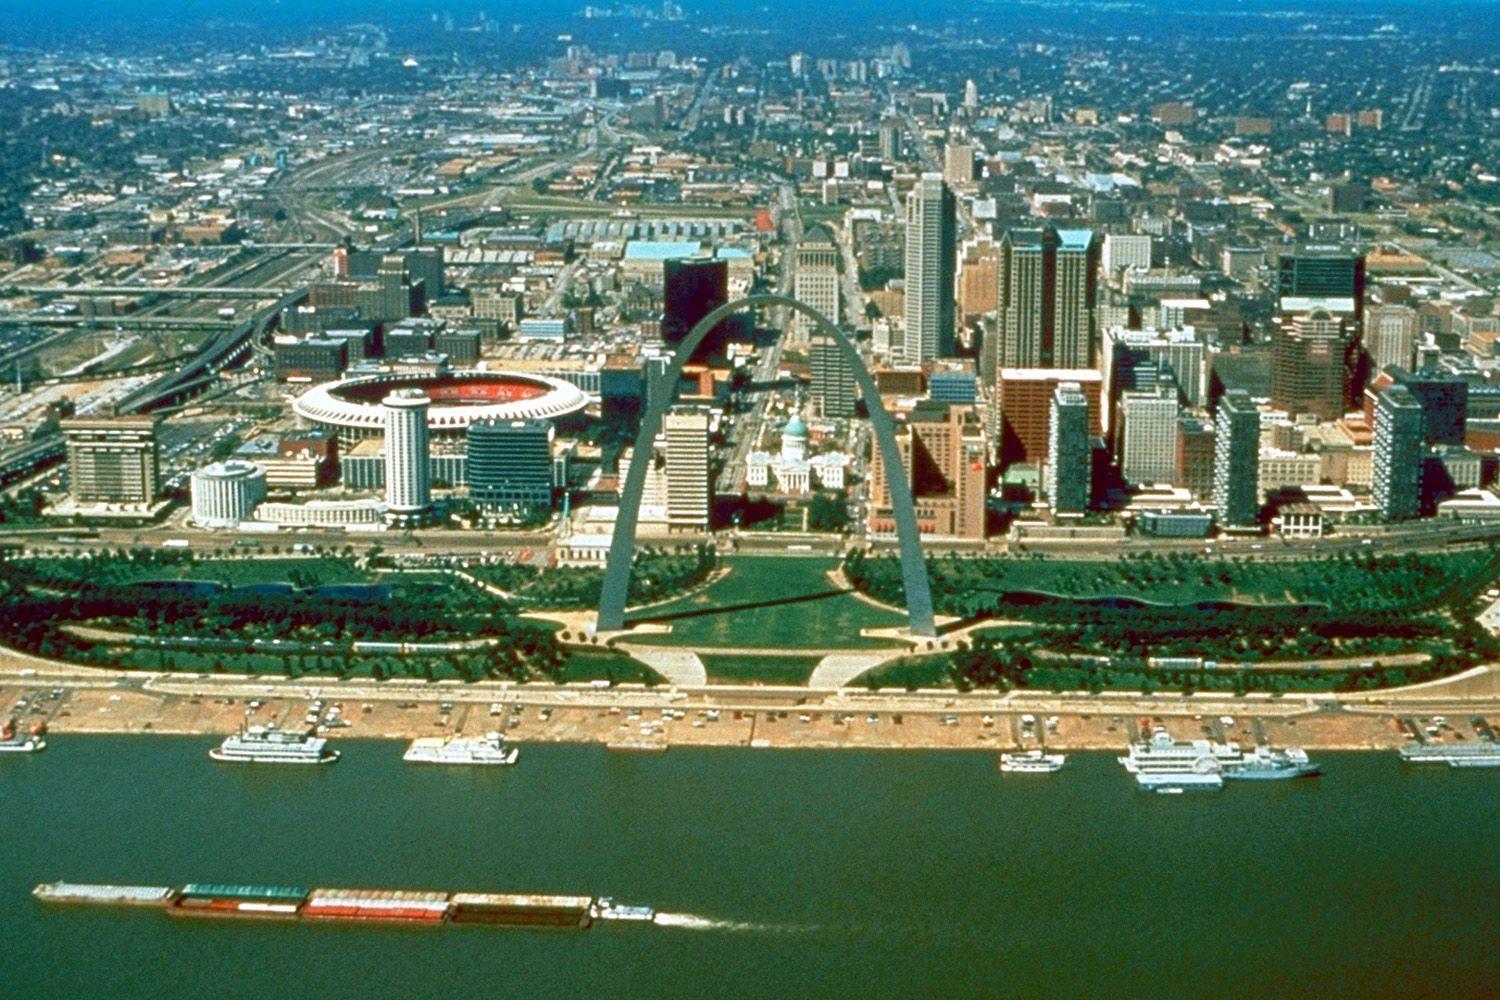 St Louis Missouri Skyline Over Arch Travel photo and wallpaper